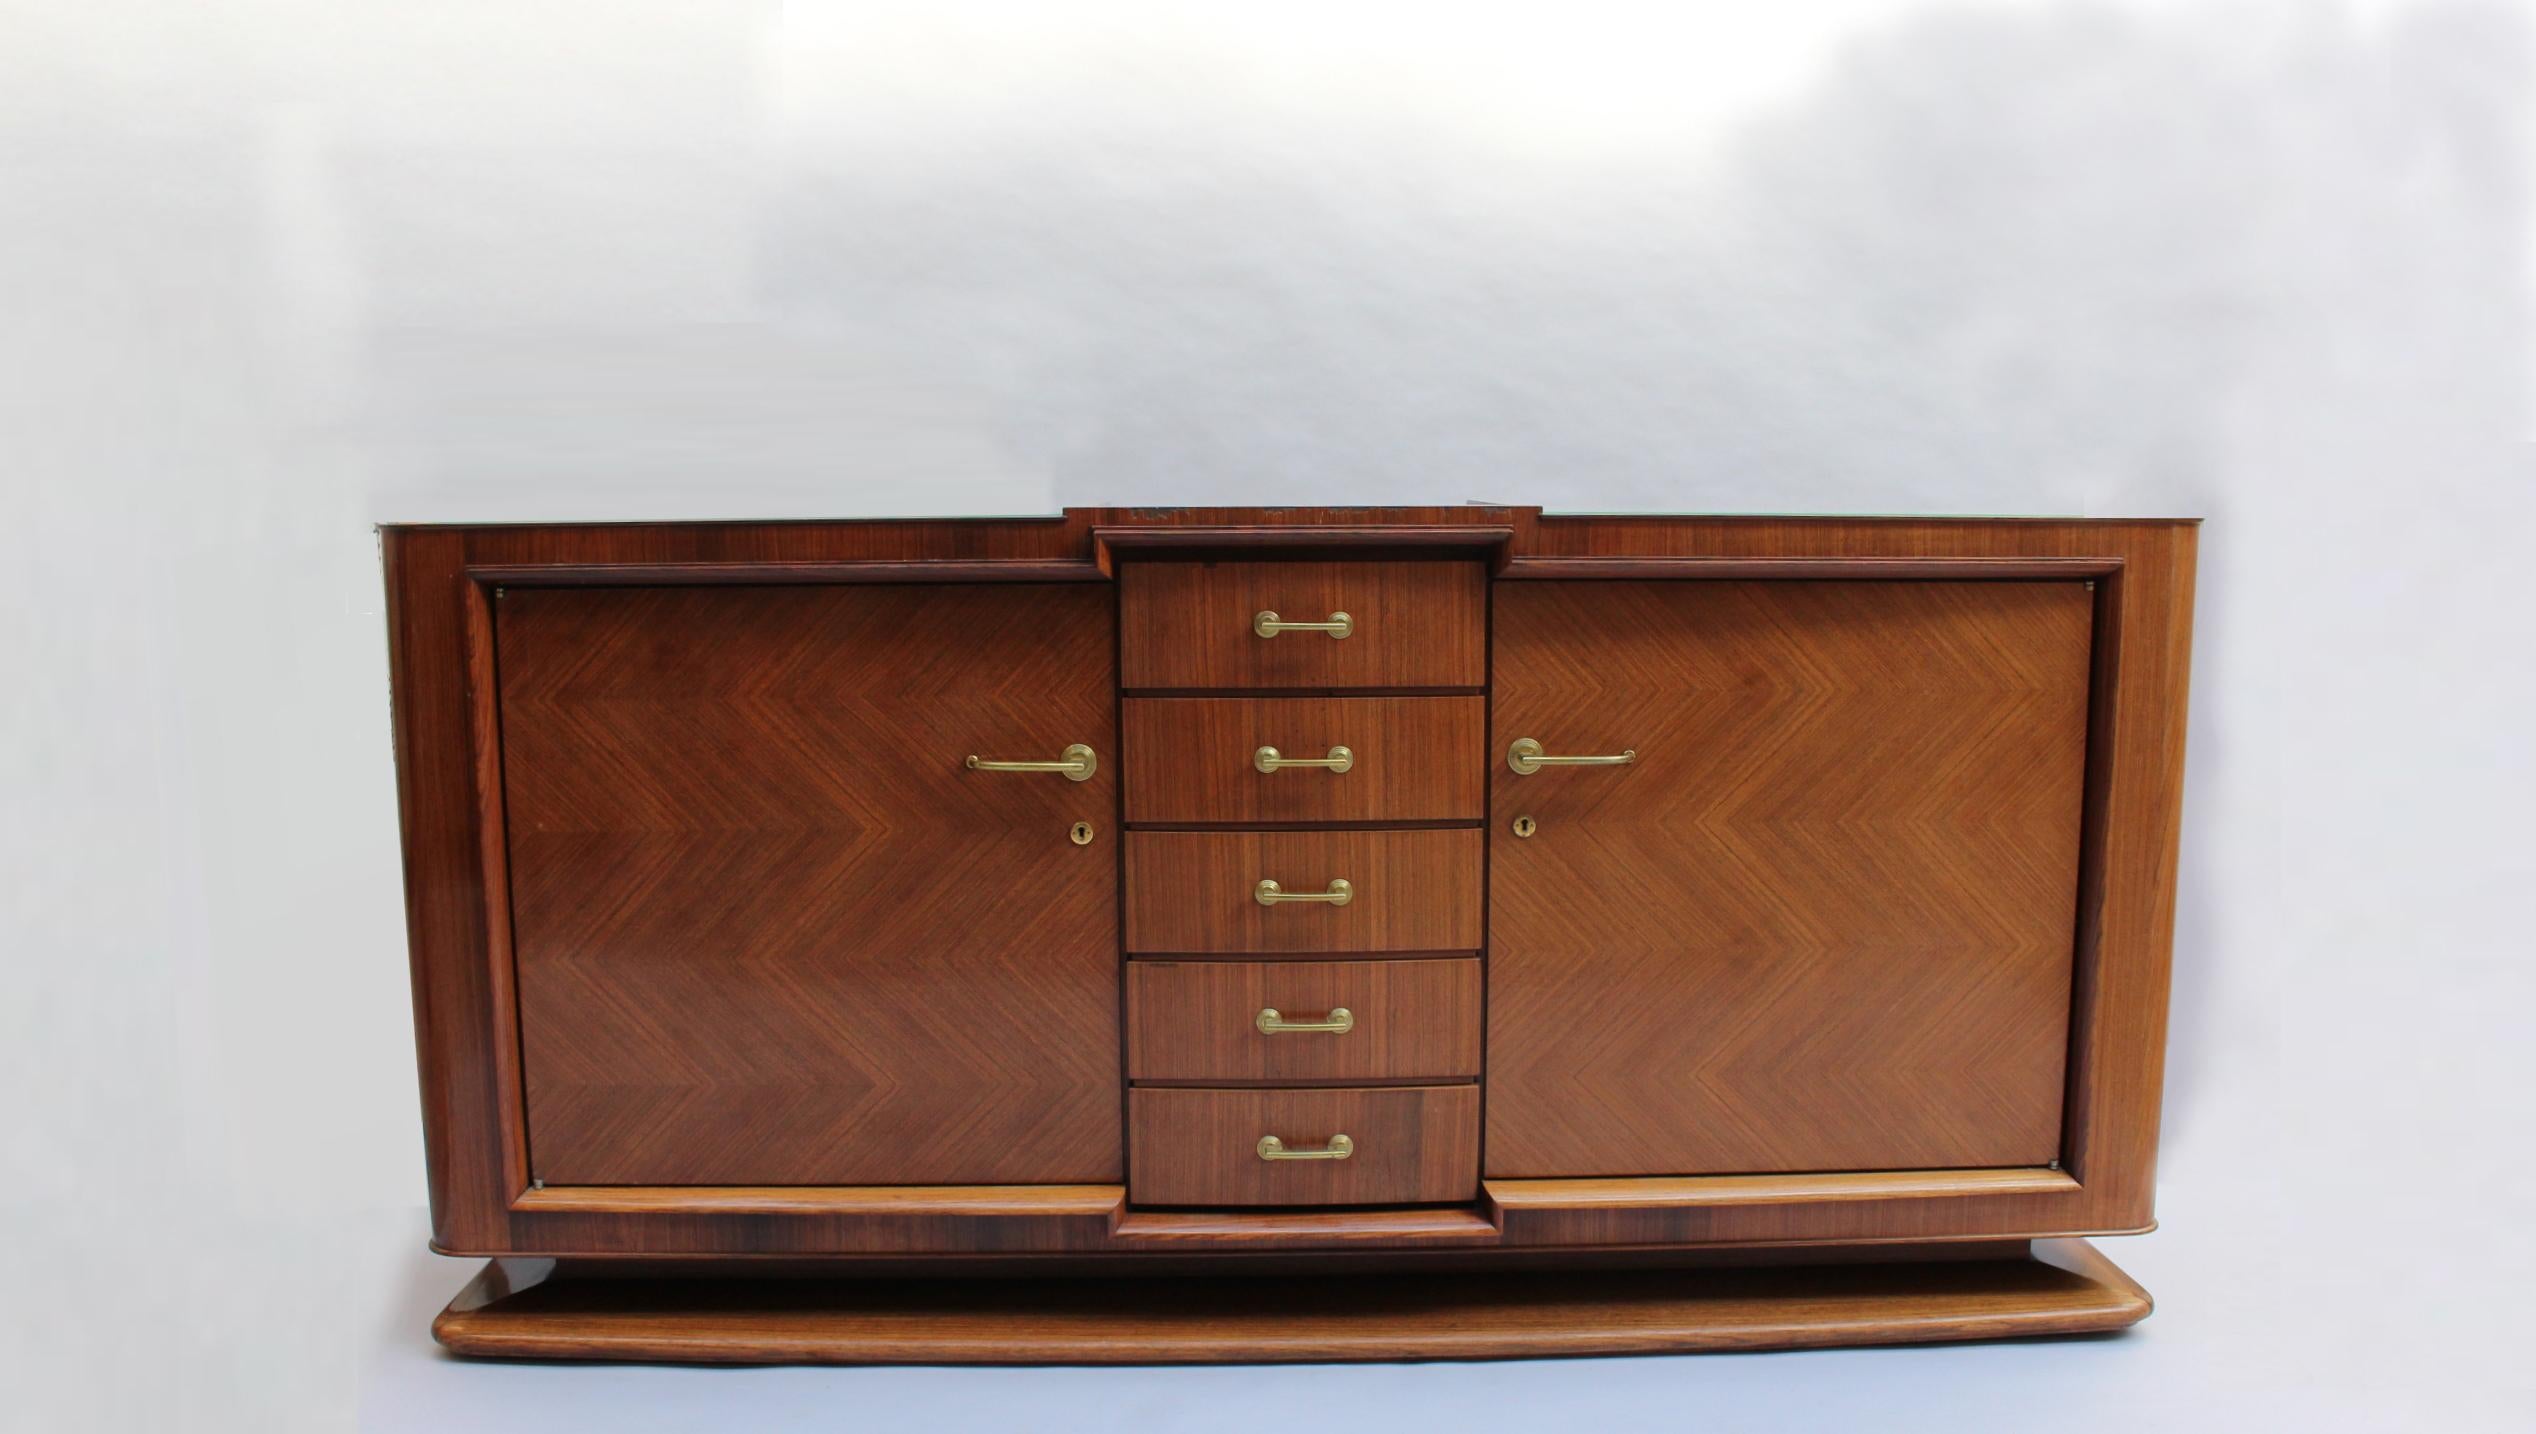 A fine French Art Deco palisander sideboard by Maxime Old, with 2 doors, 5 drawers and bronze hardware. Signed
A matching dining table, 8 chairs (6 side and 2 arm), and a dry bar are also available, see pictures.